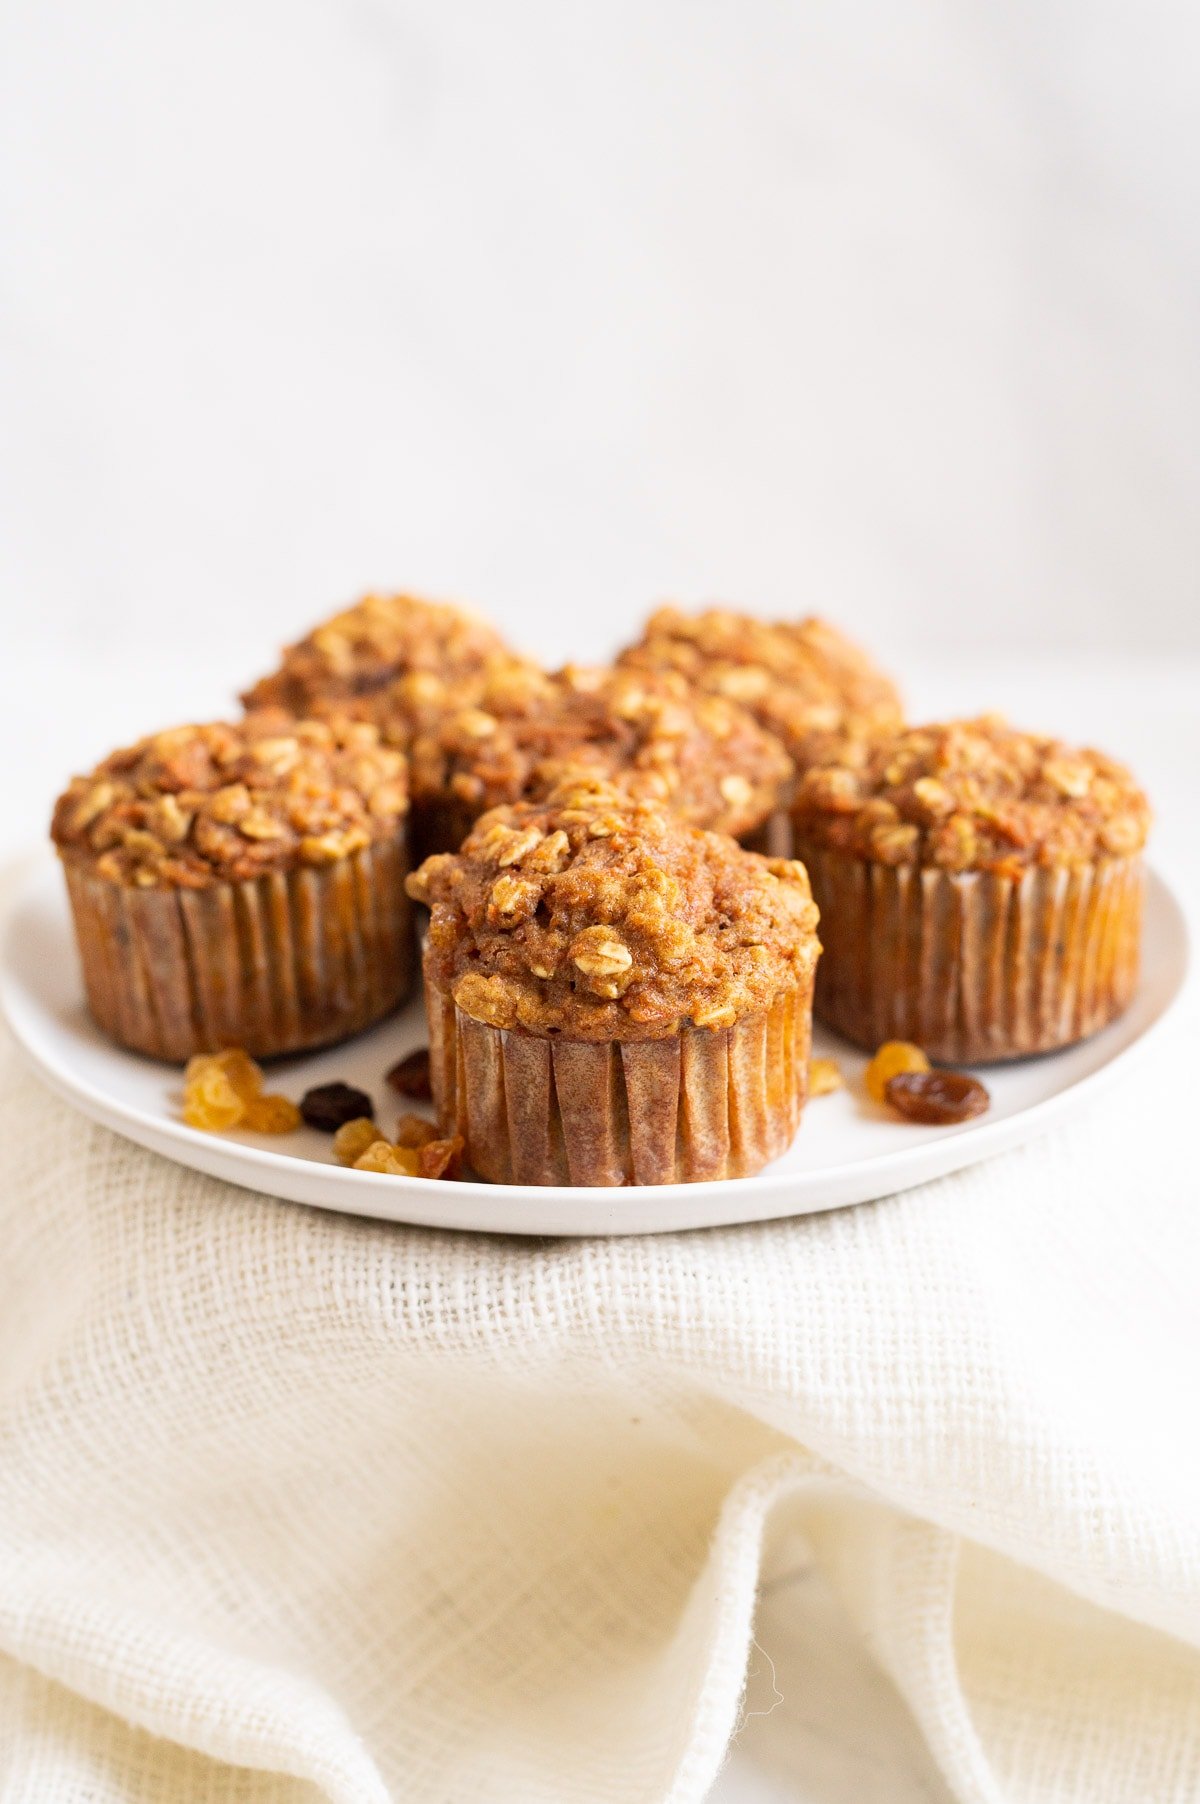 Five healthy carrot cake muffins on white plate with raisins.